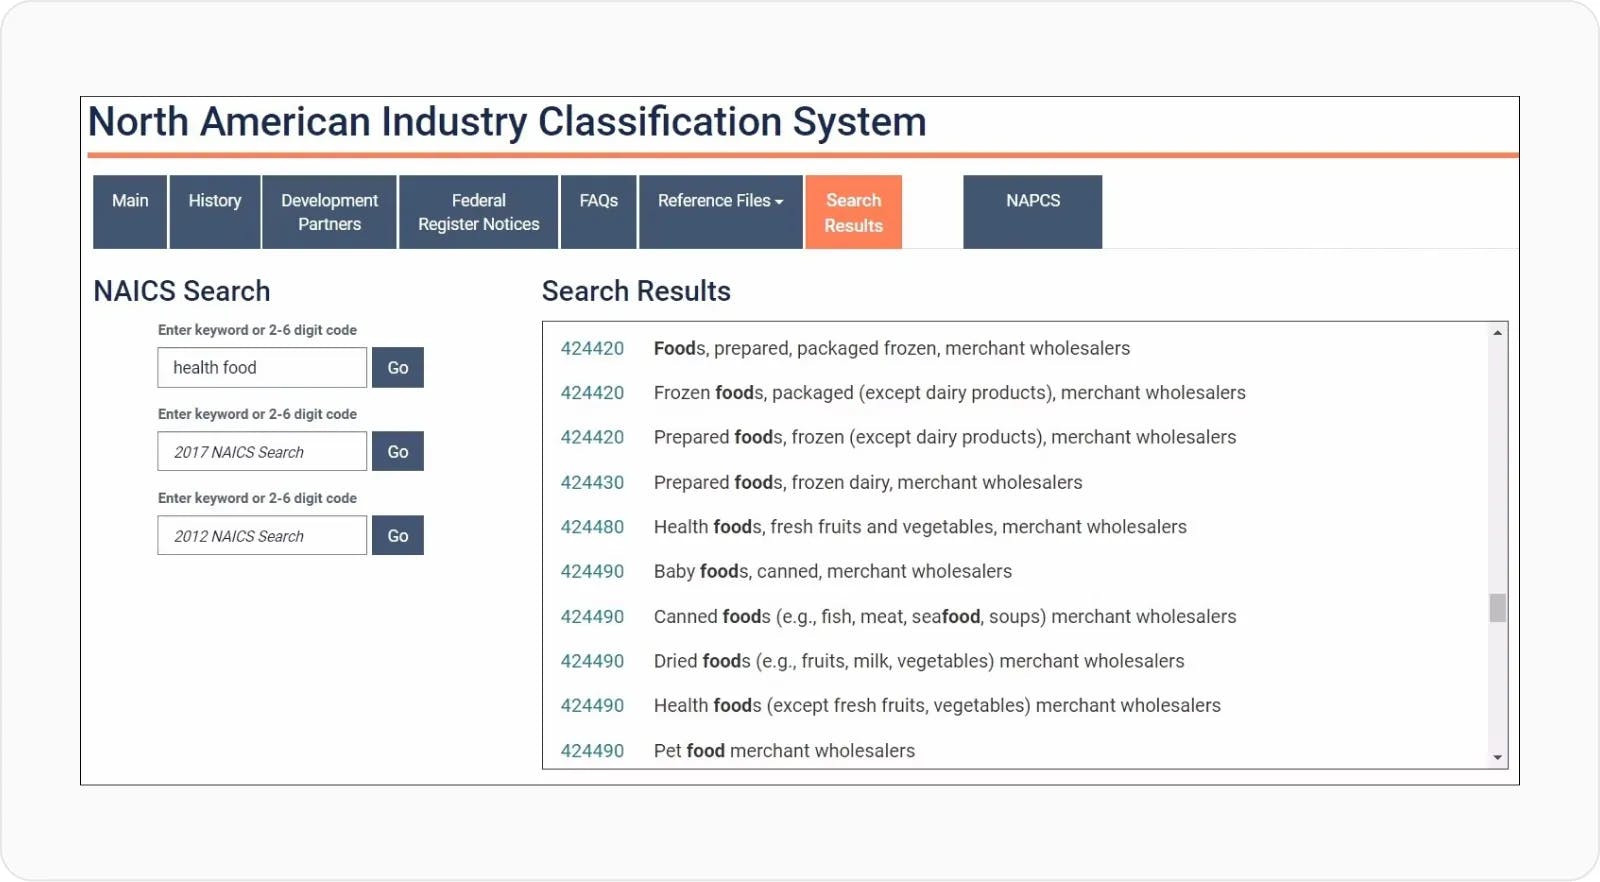 NA industry classification system table